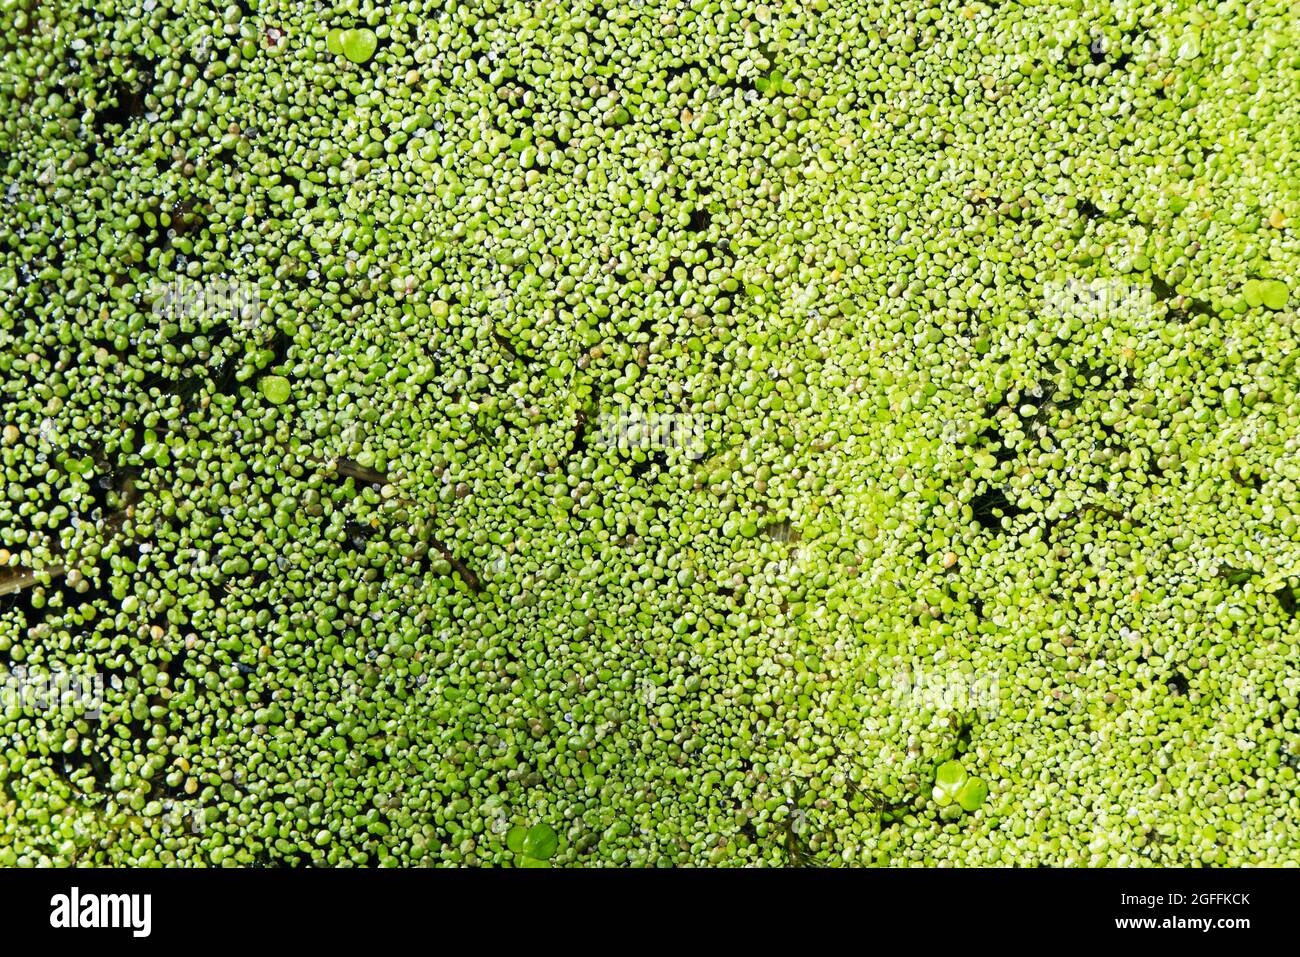 Top view of green fresh duckweed, water lentils, or water lenses. Stock Photo